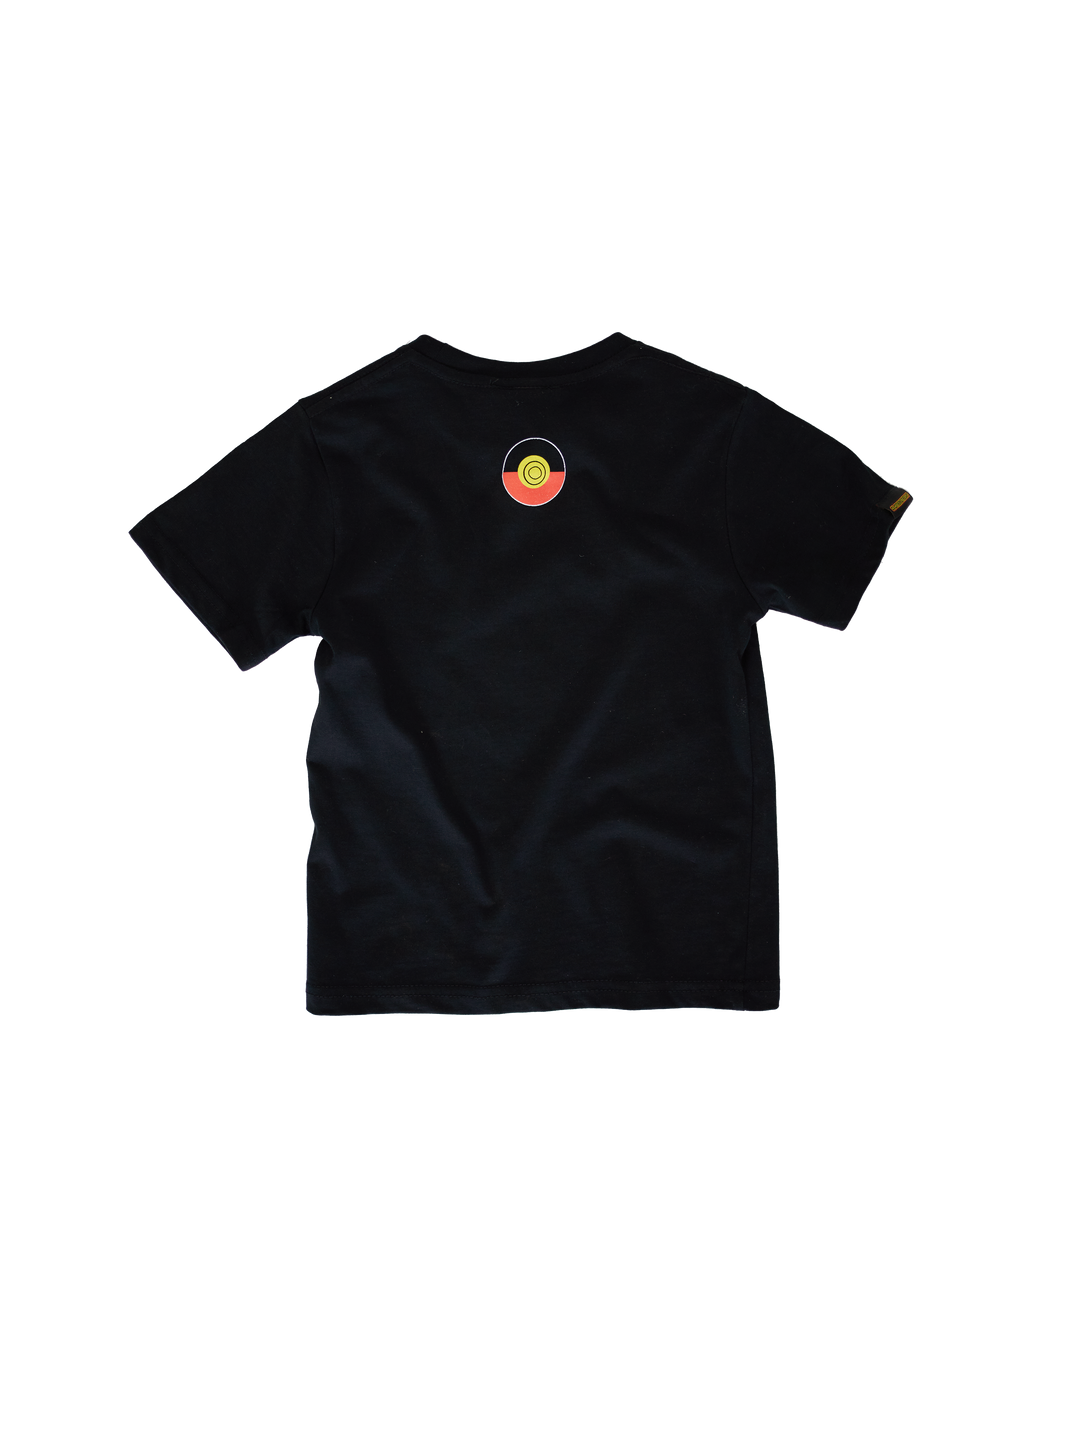 KIDS First Nations Flags Tee